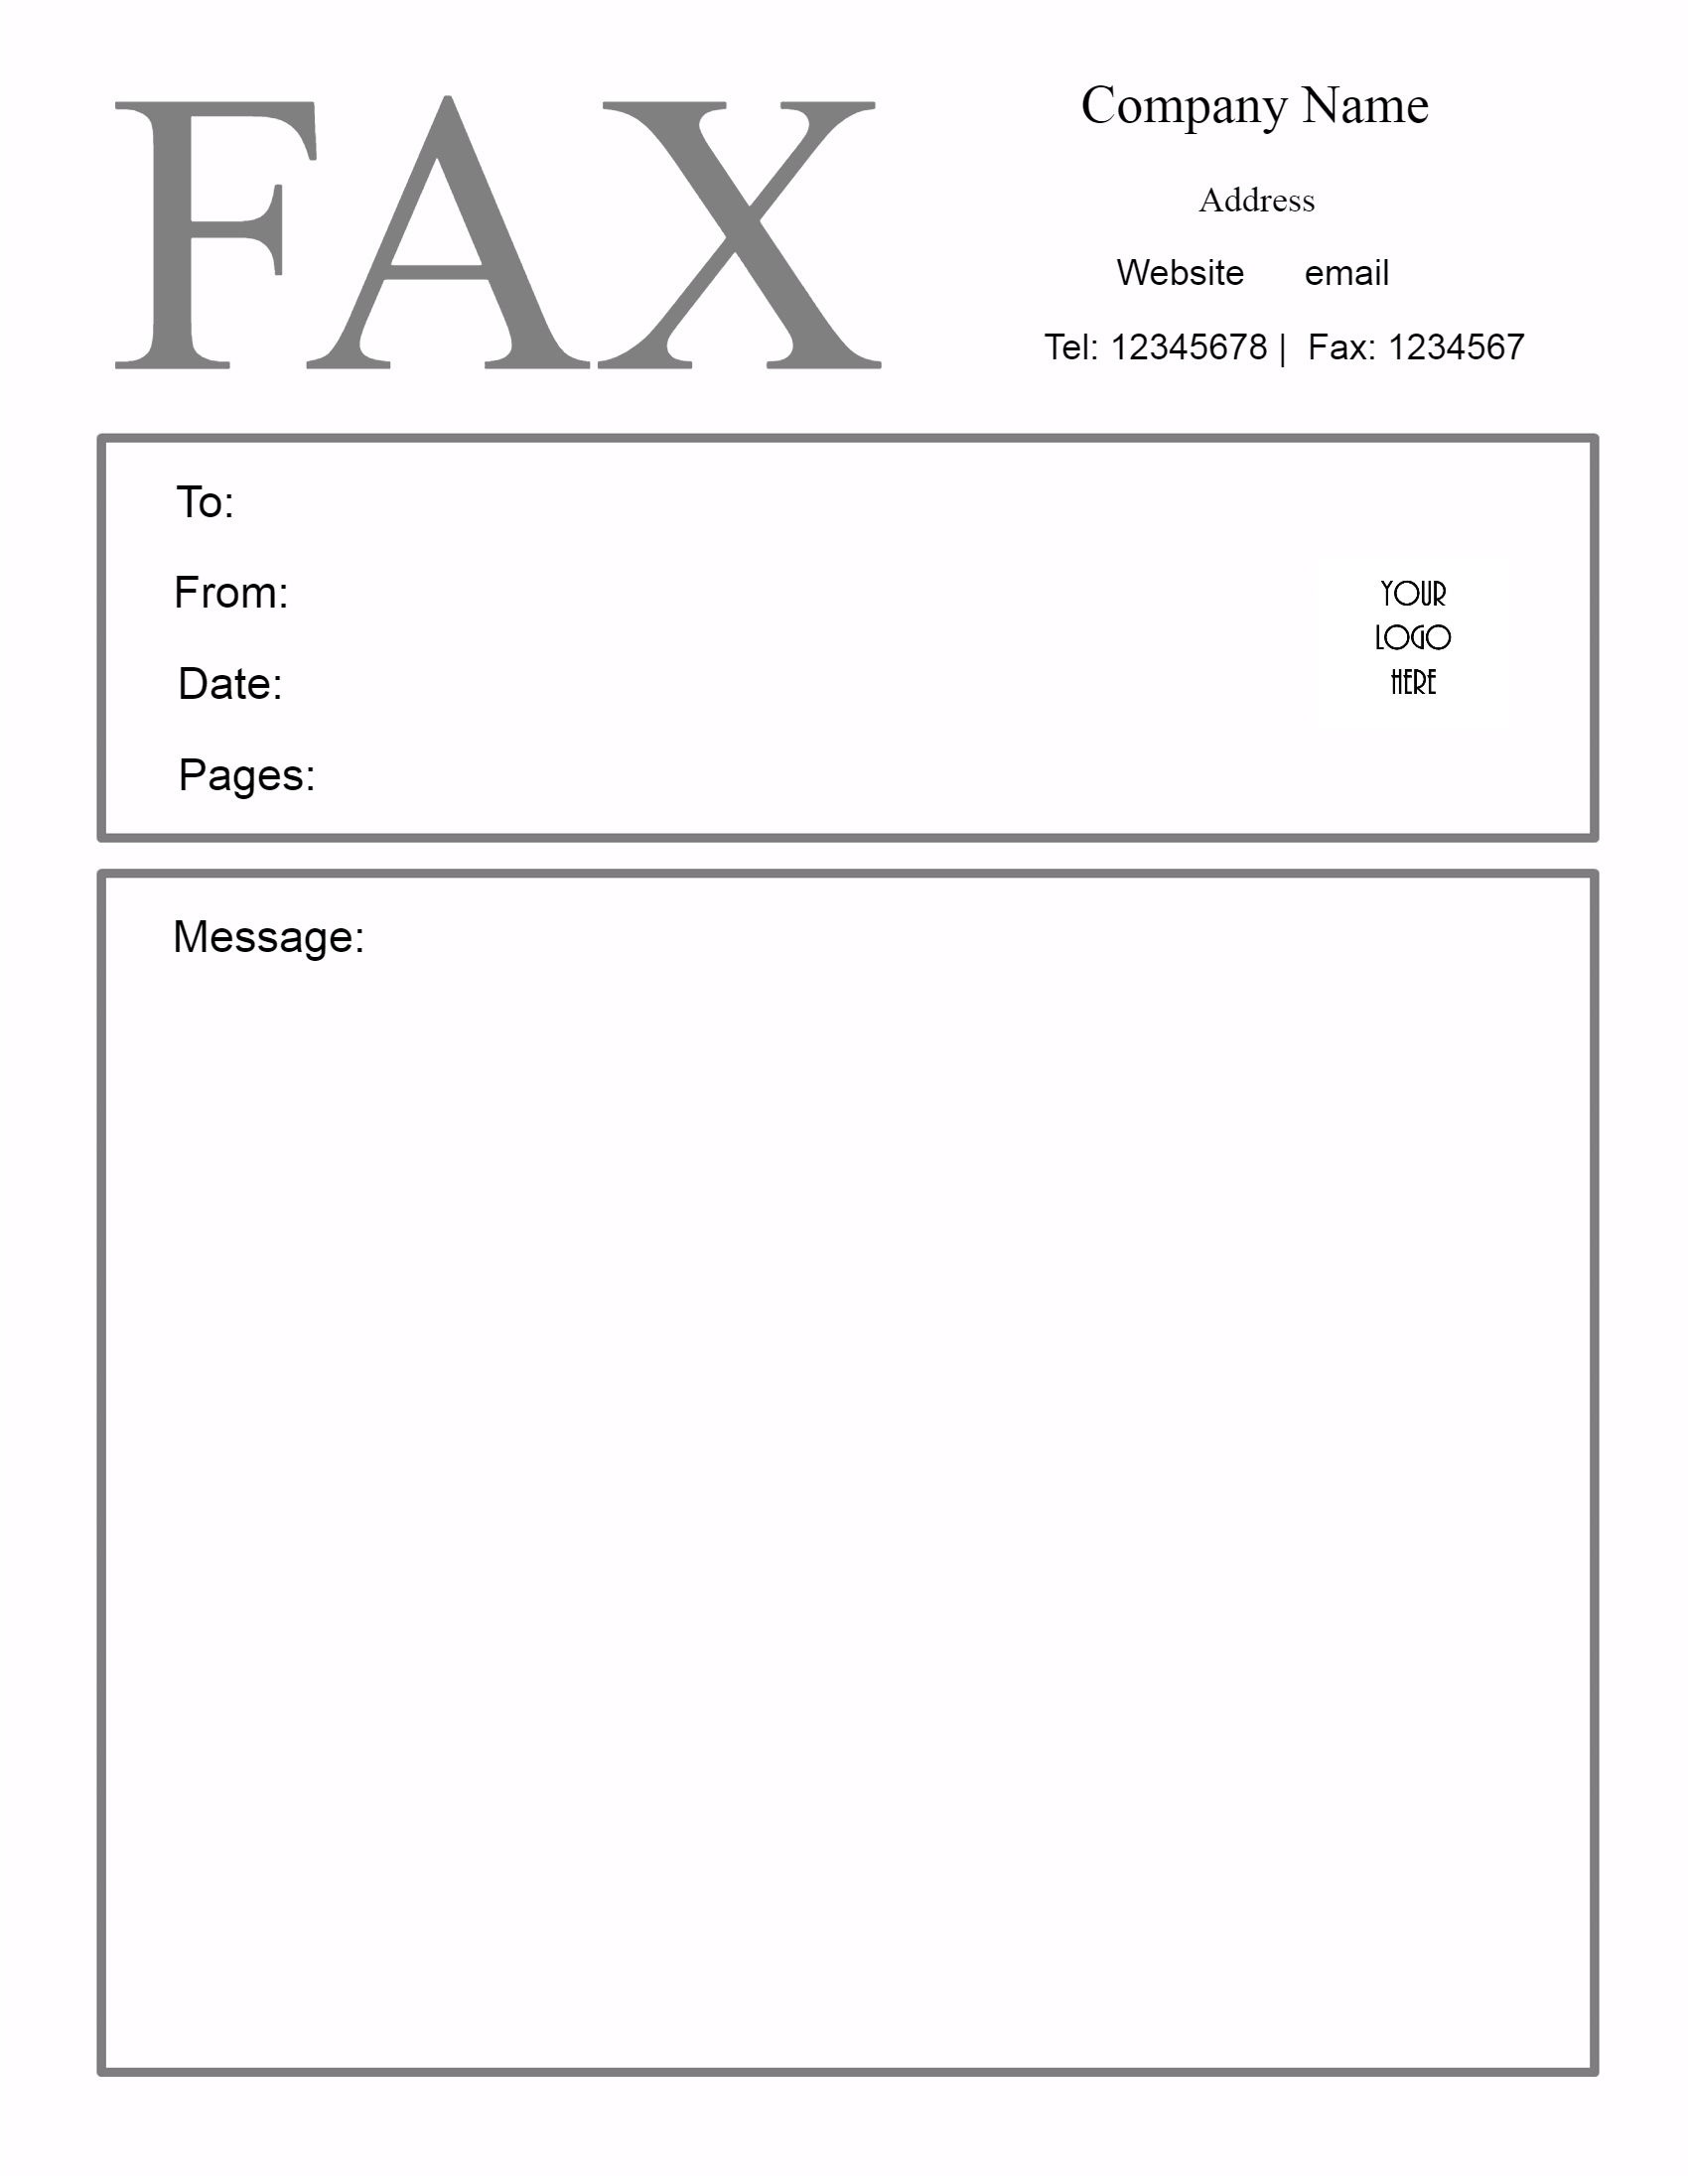 Free Fax Cover Sheet Template | Customize Online Then Print - Free Printable Fax Cover Sheet Pdf